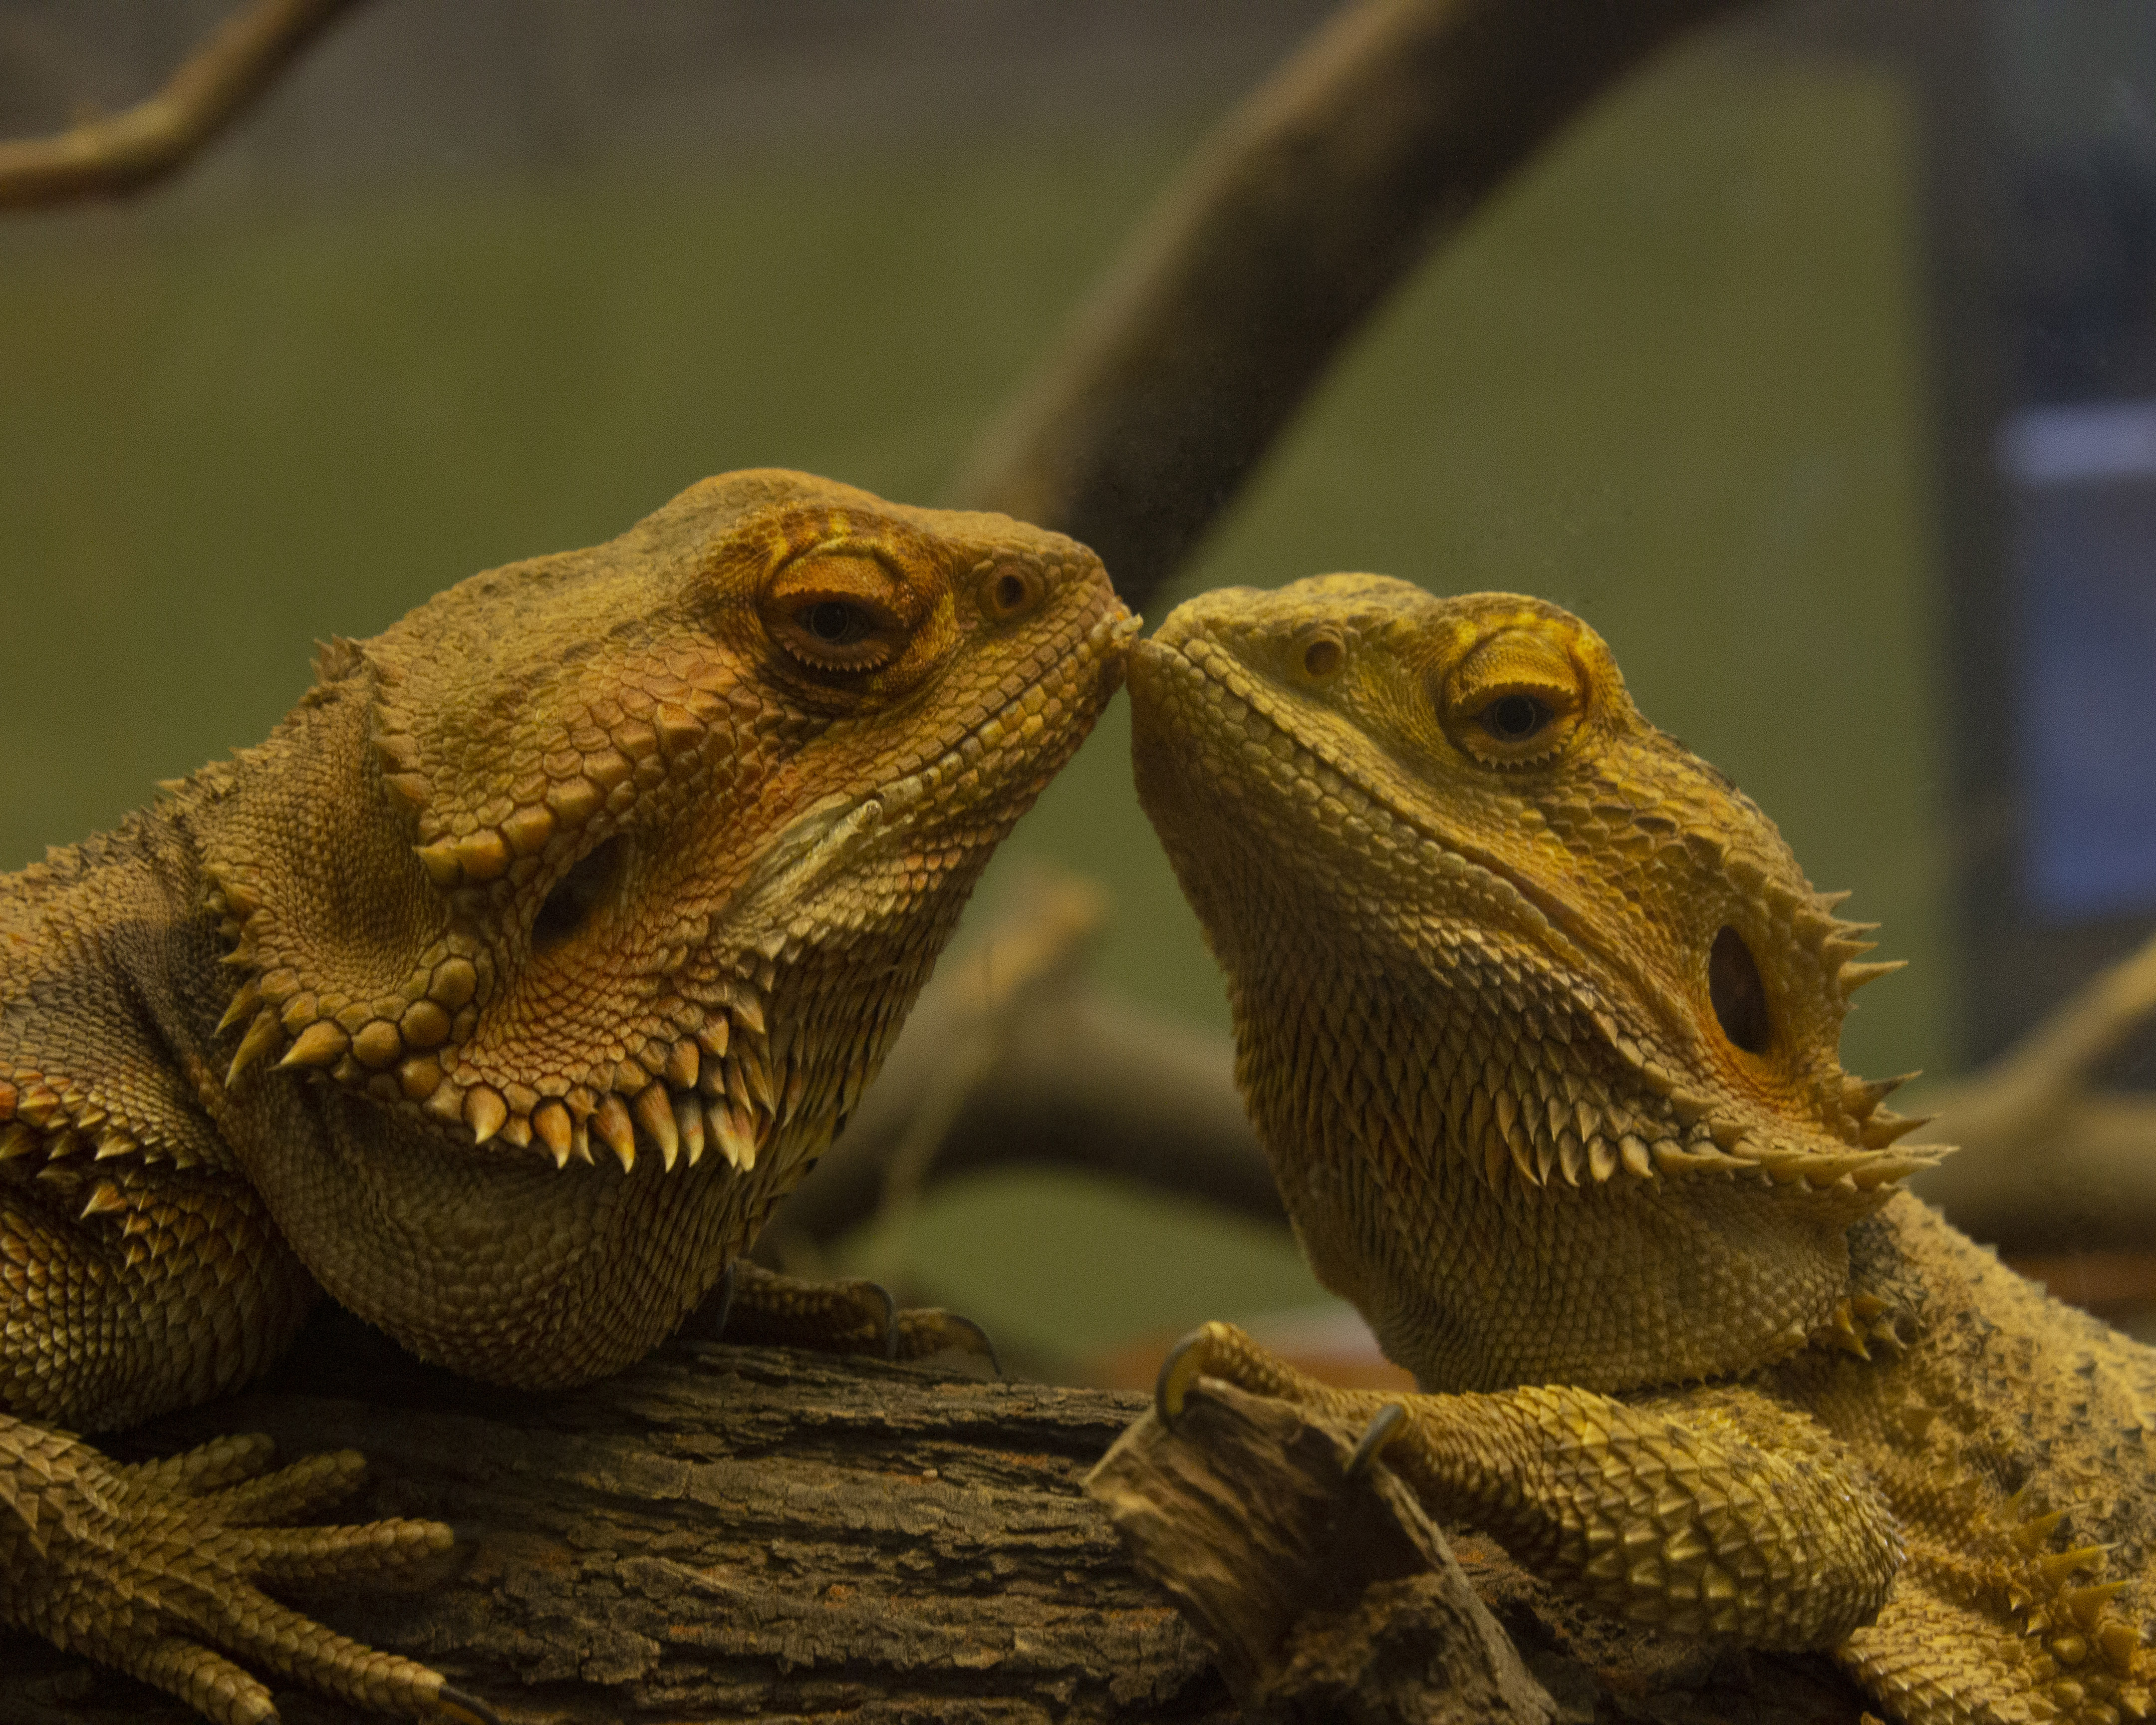 Photo by Melina Kraft  |  The Reptile Section at the Reid Park Zoo. Two bearded dragons in their enclosure.